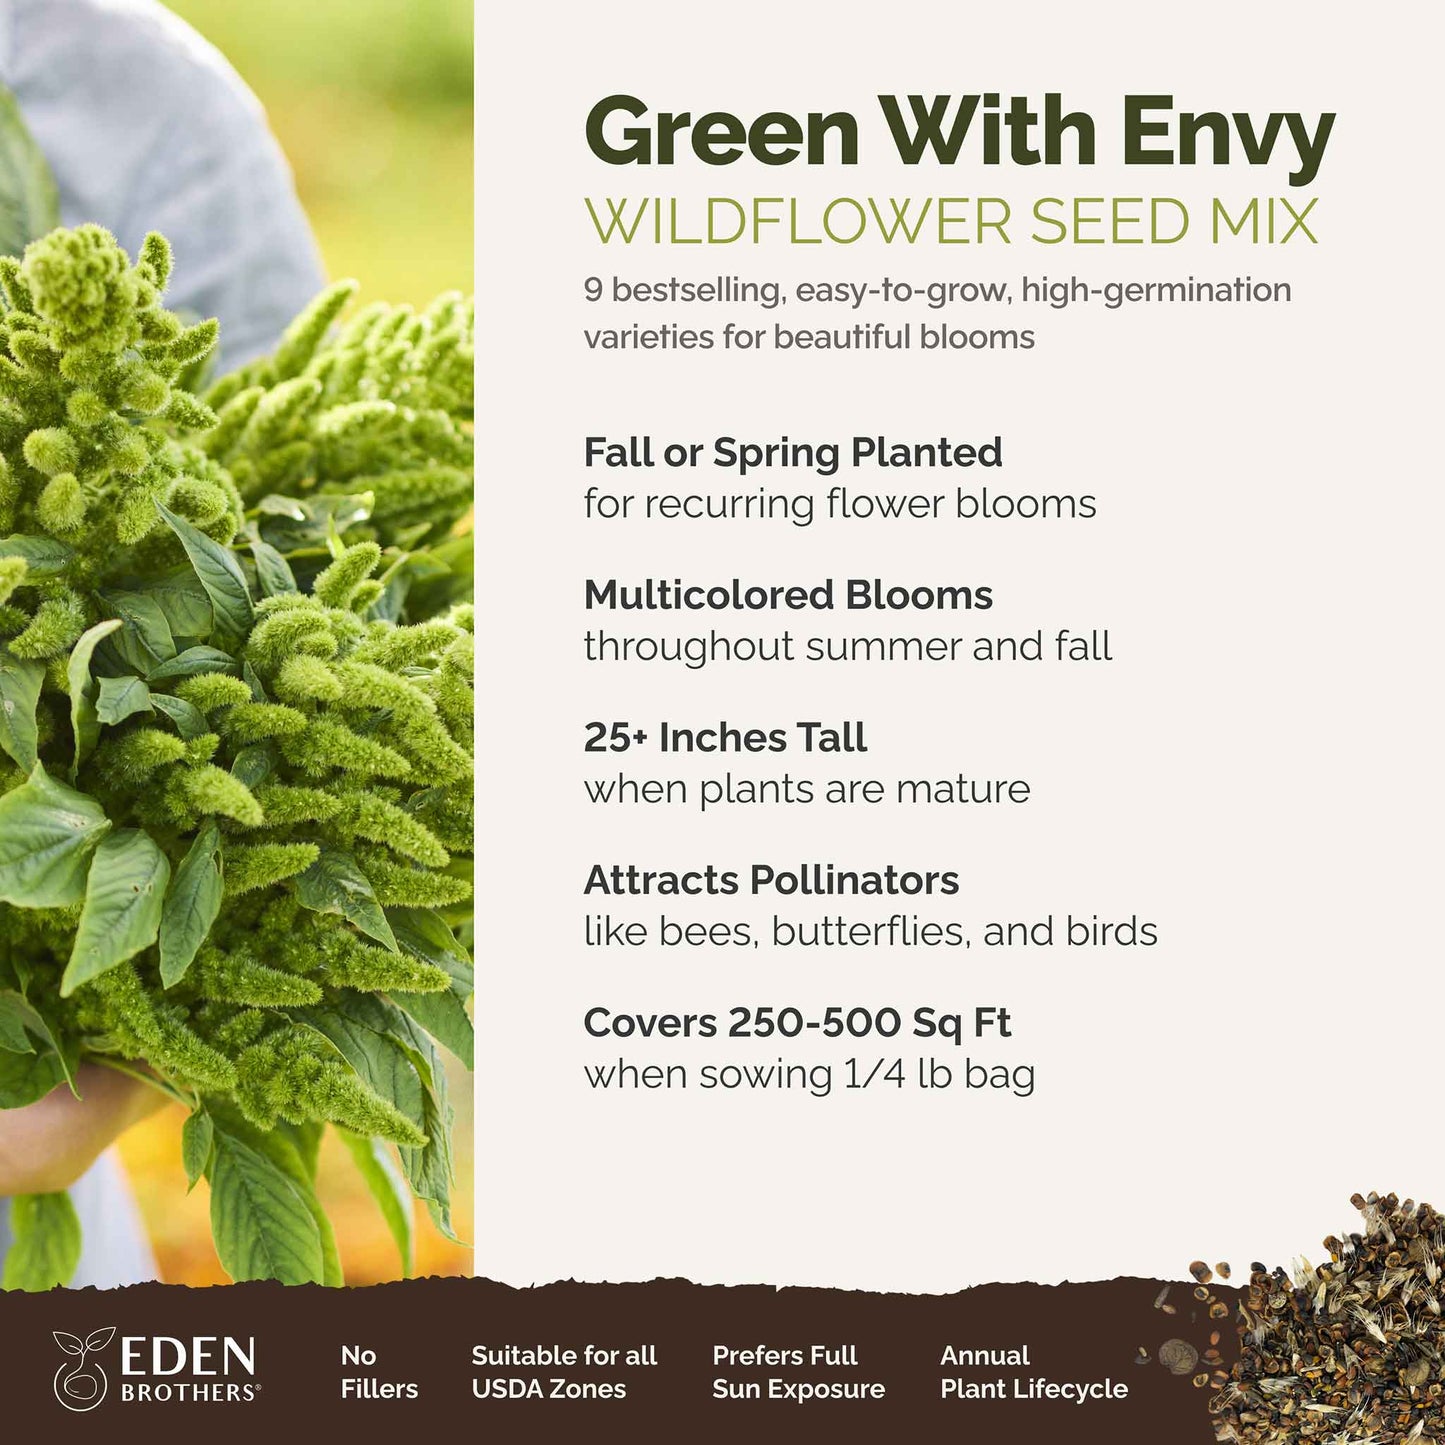 green with envy overview